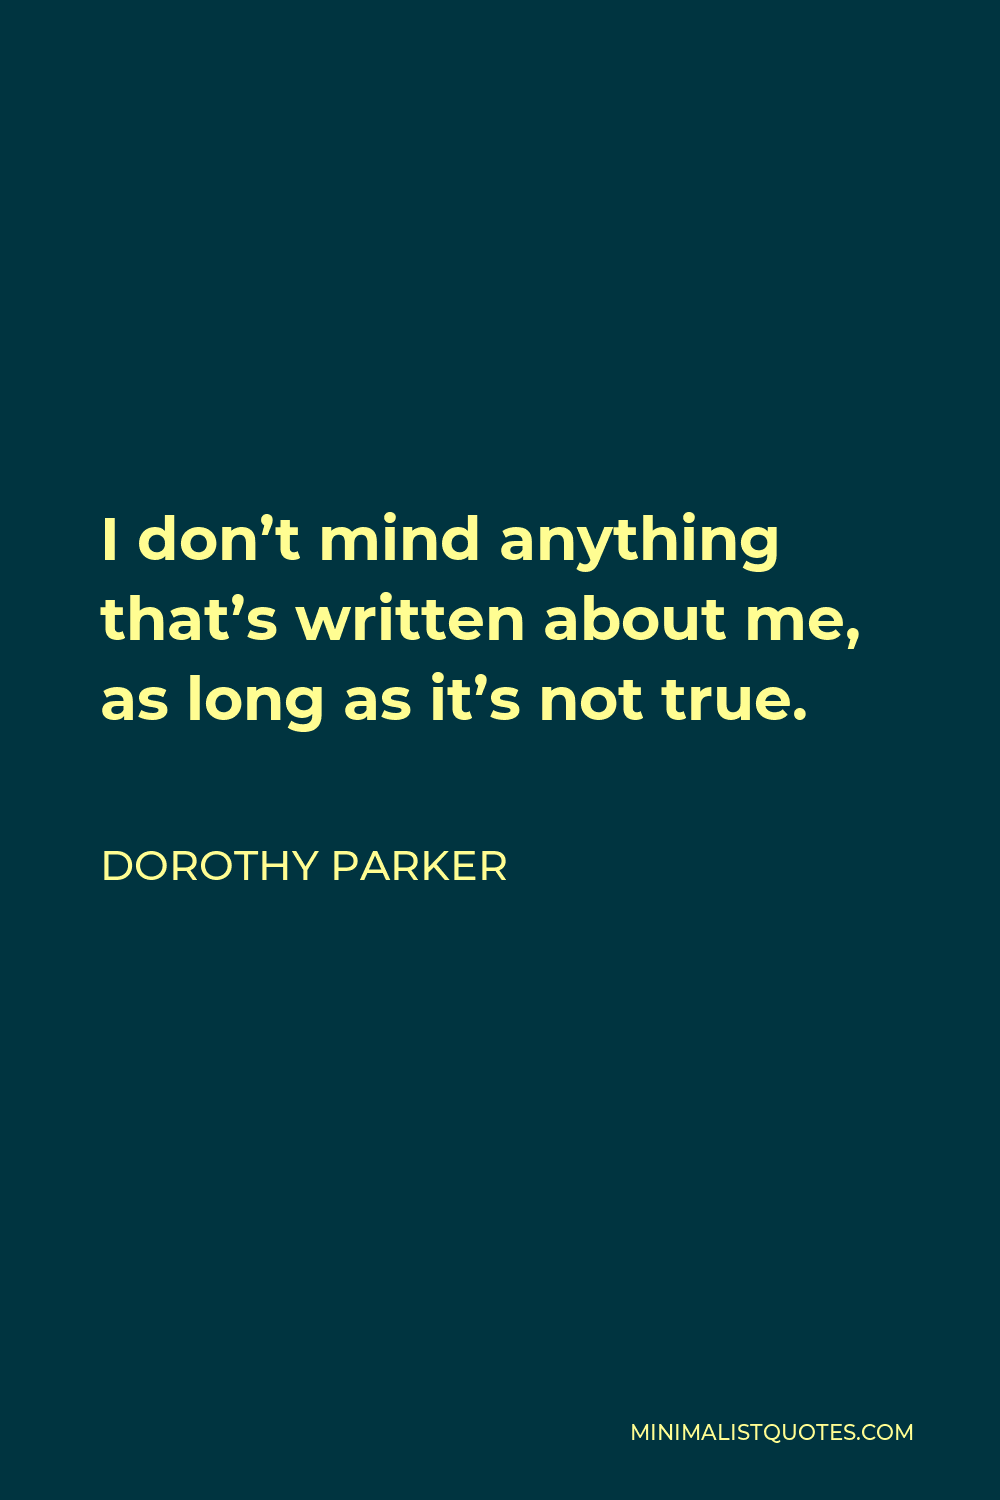 Dorothy Parker Quote - I don’t mind anything that’s written about me, as long as it’s not true.